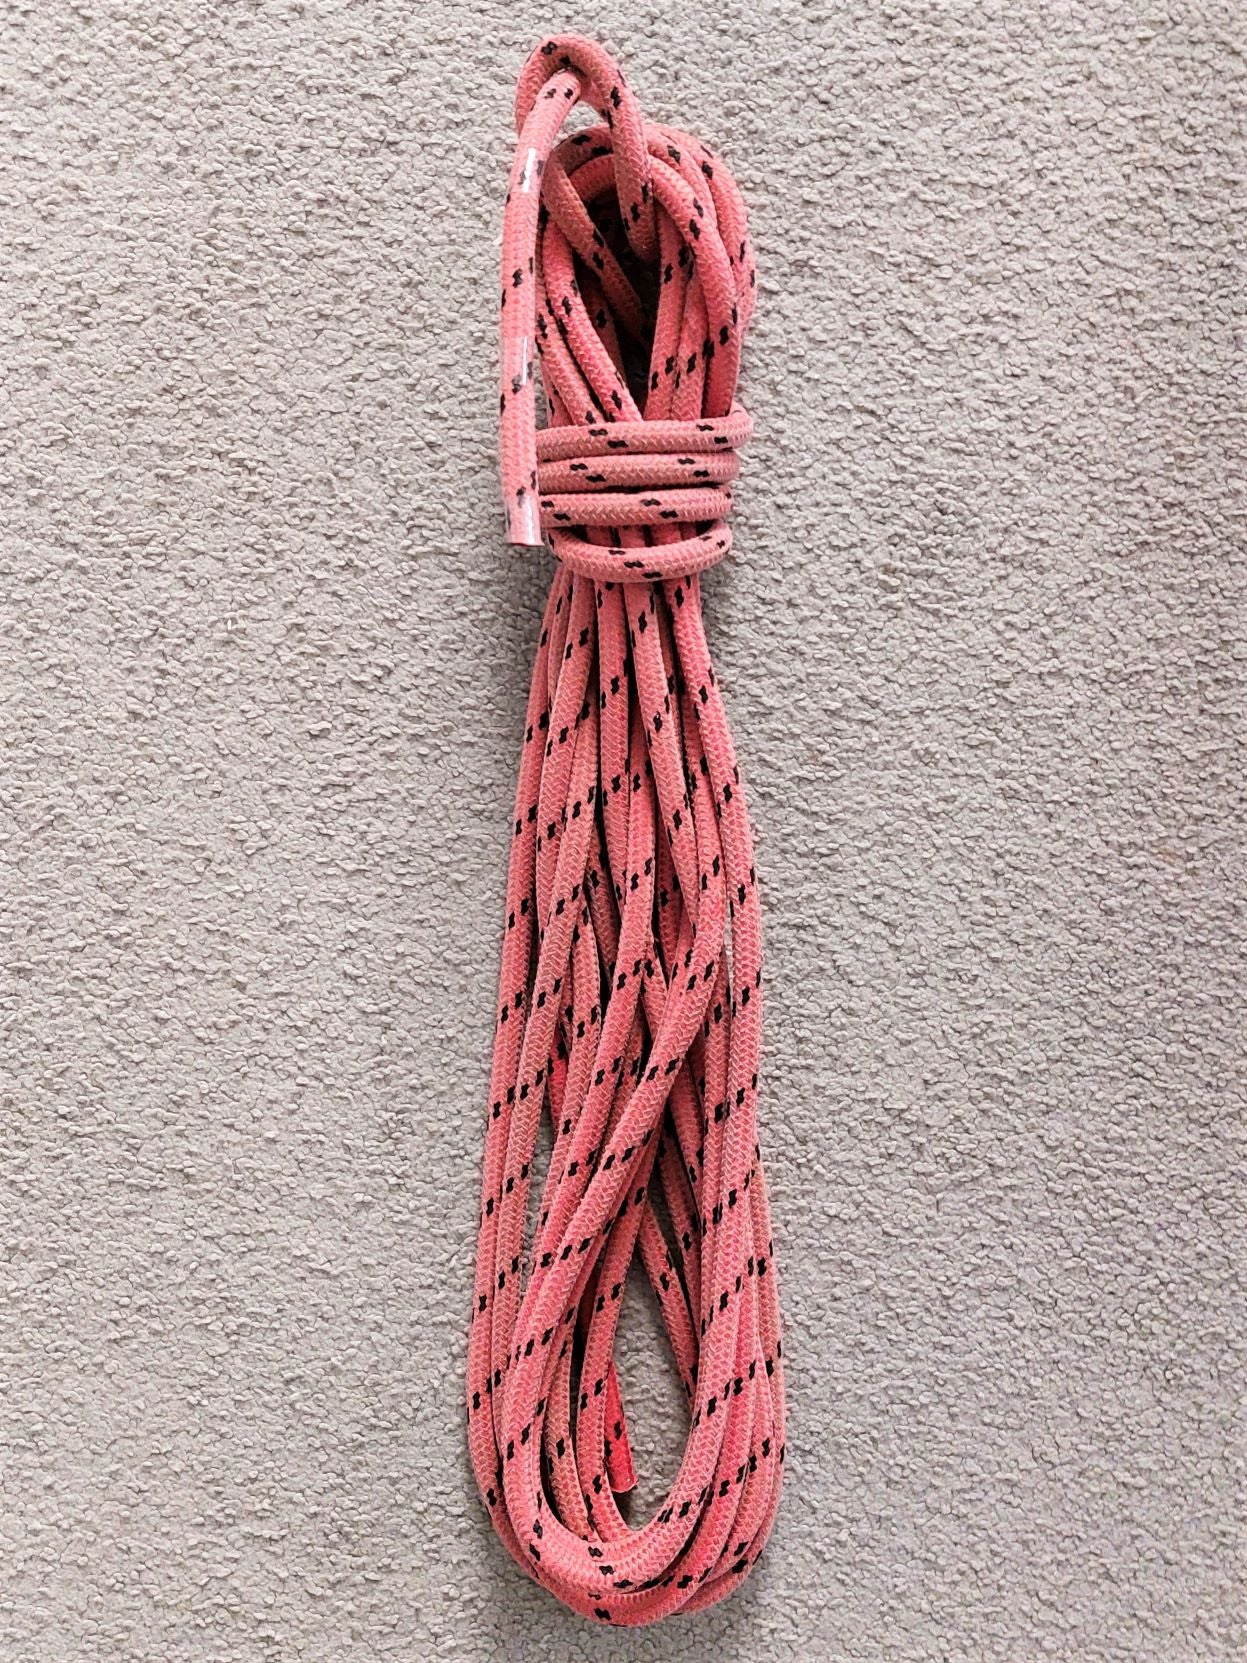 10mm x 7.4m Spectra Rope (WTR-223) - Sail Exchange